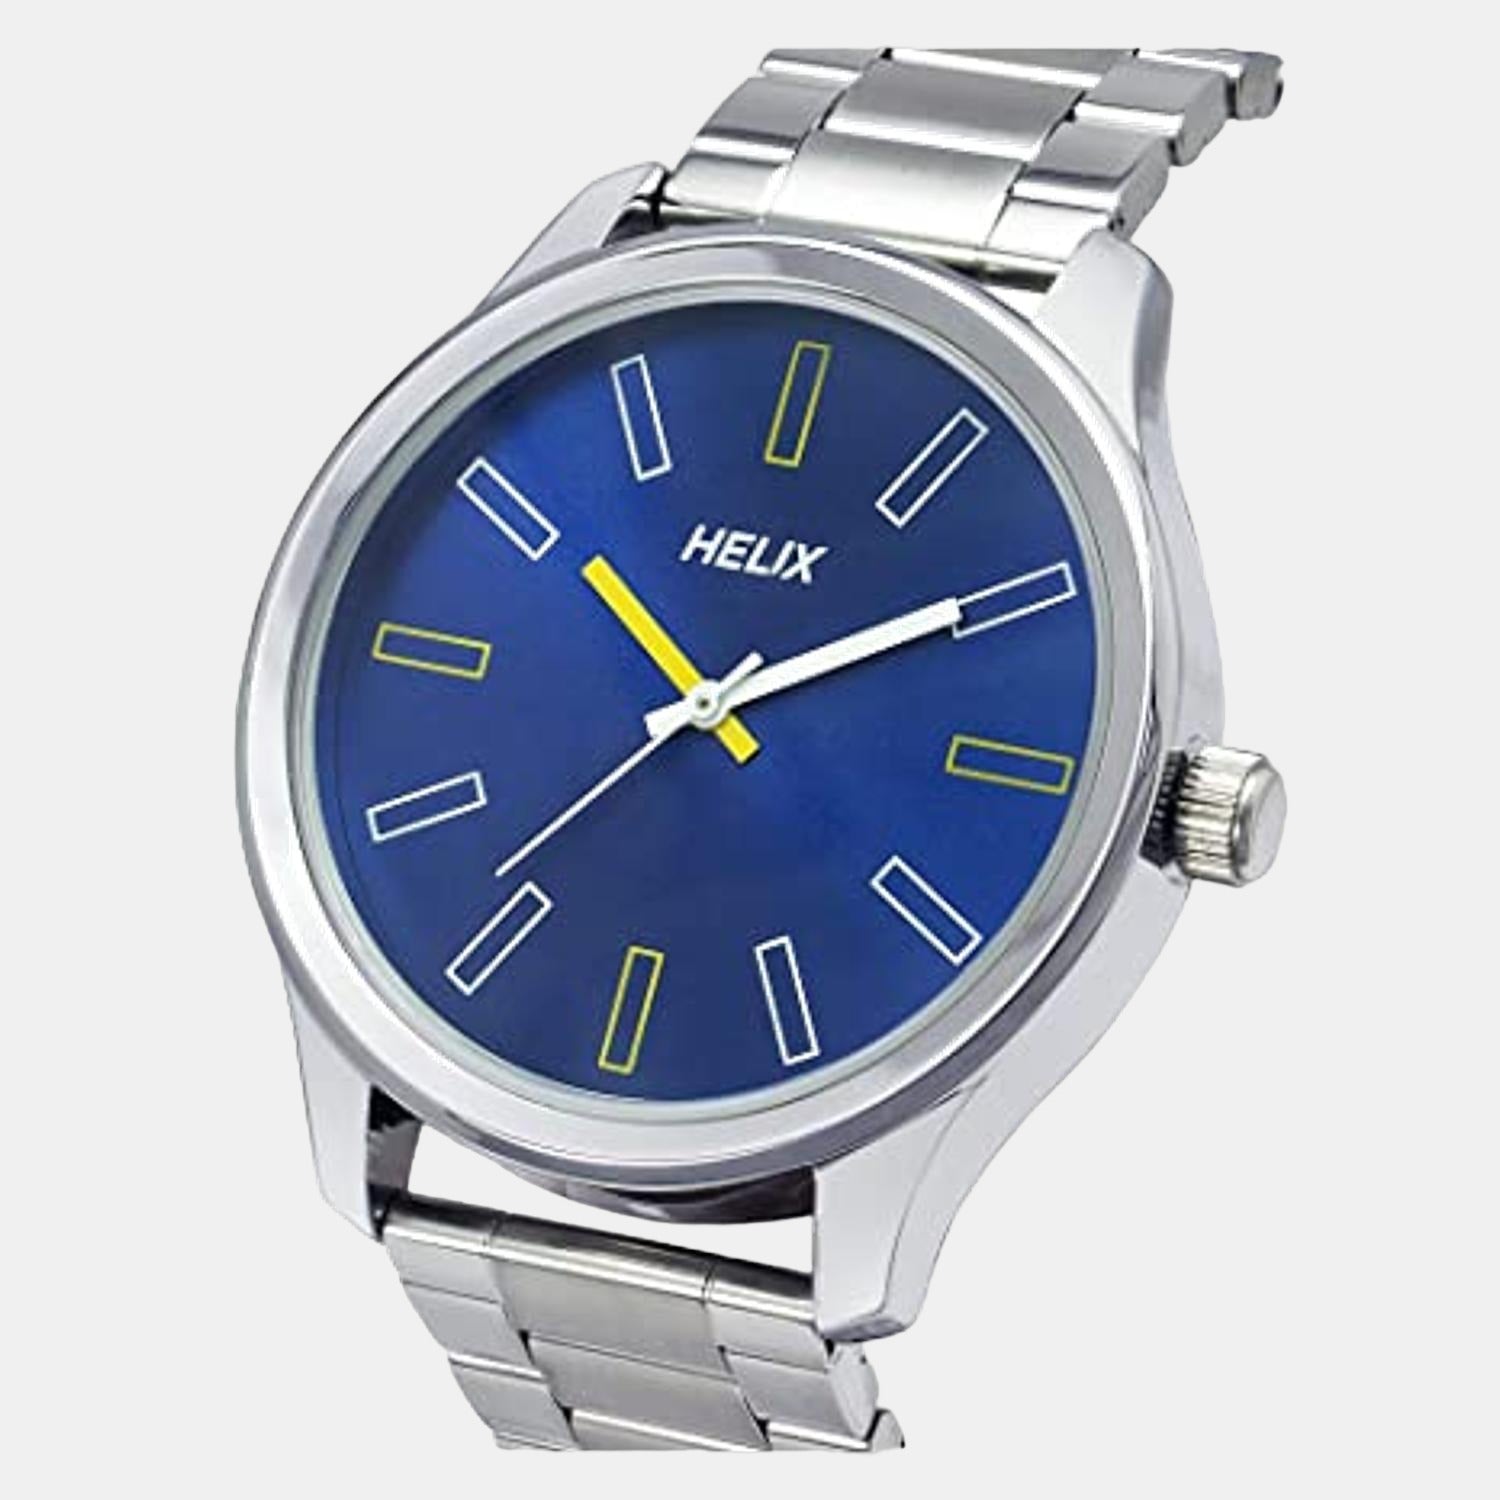 helix-stainless-steel-blue-analog-male-watch-tw043hg04